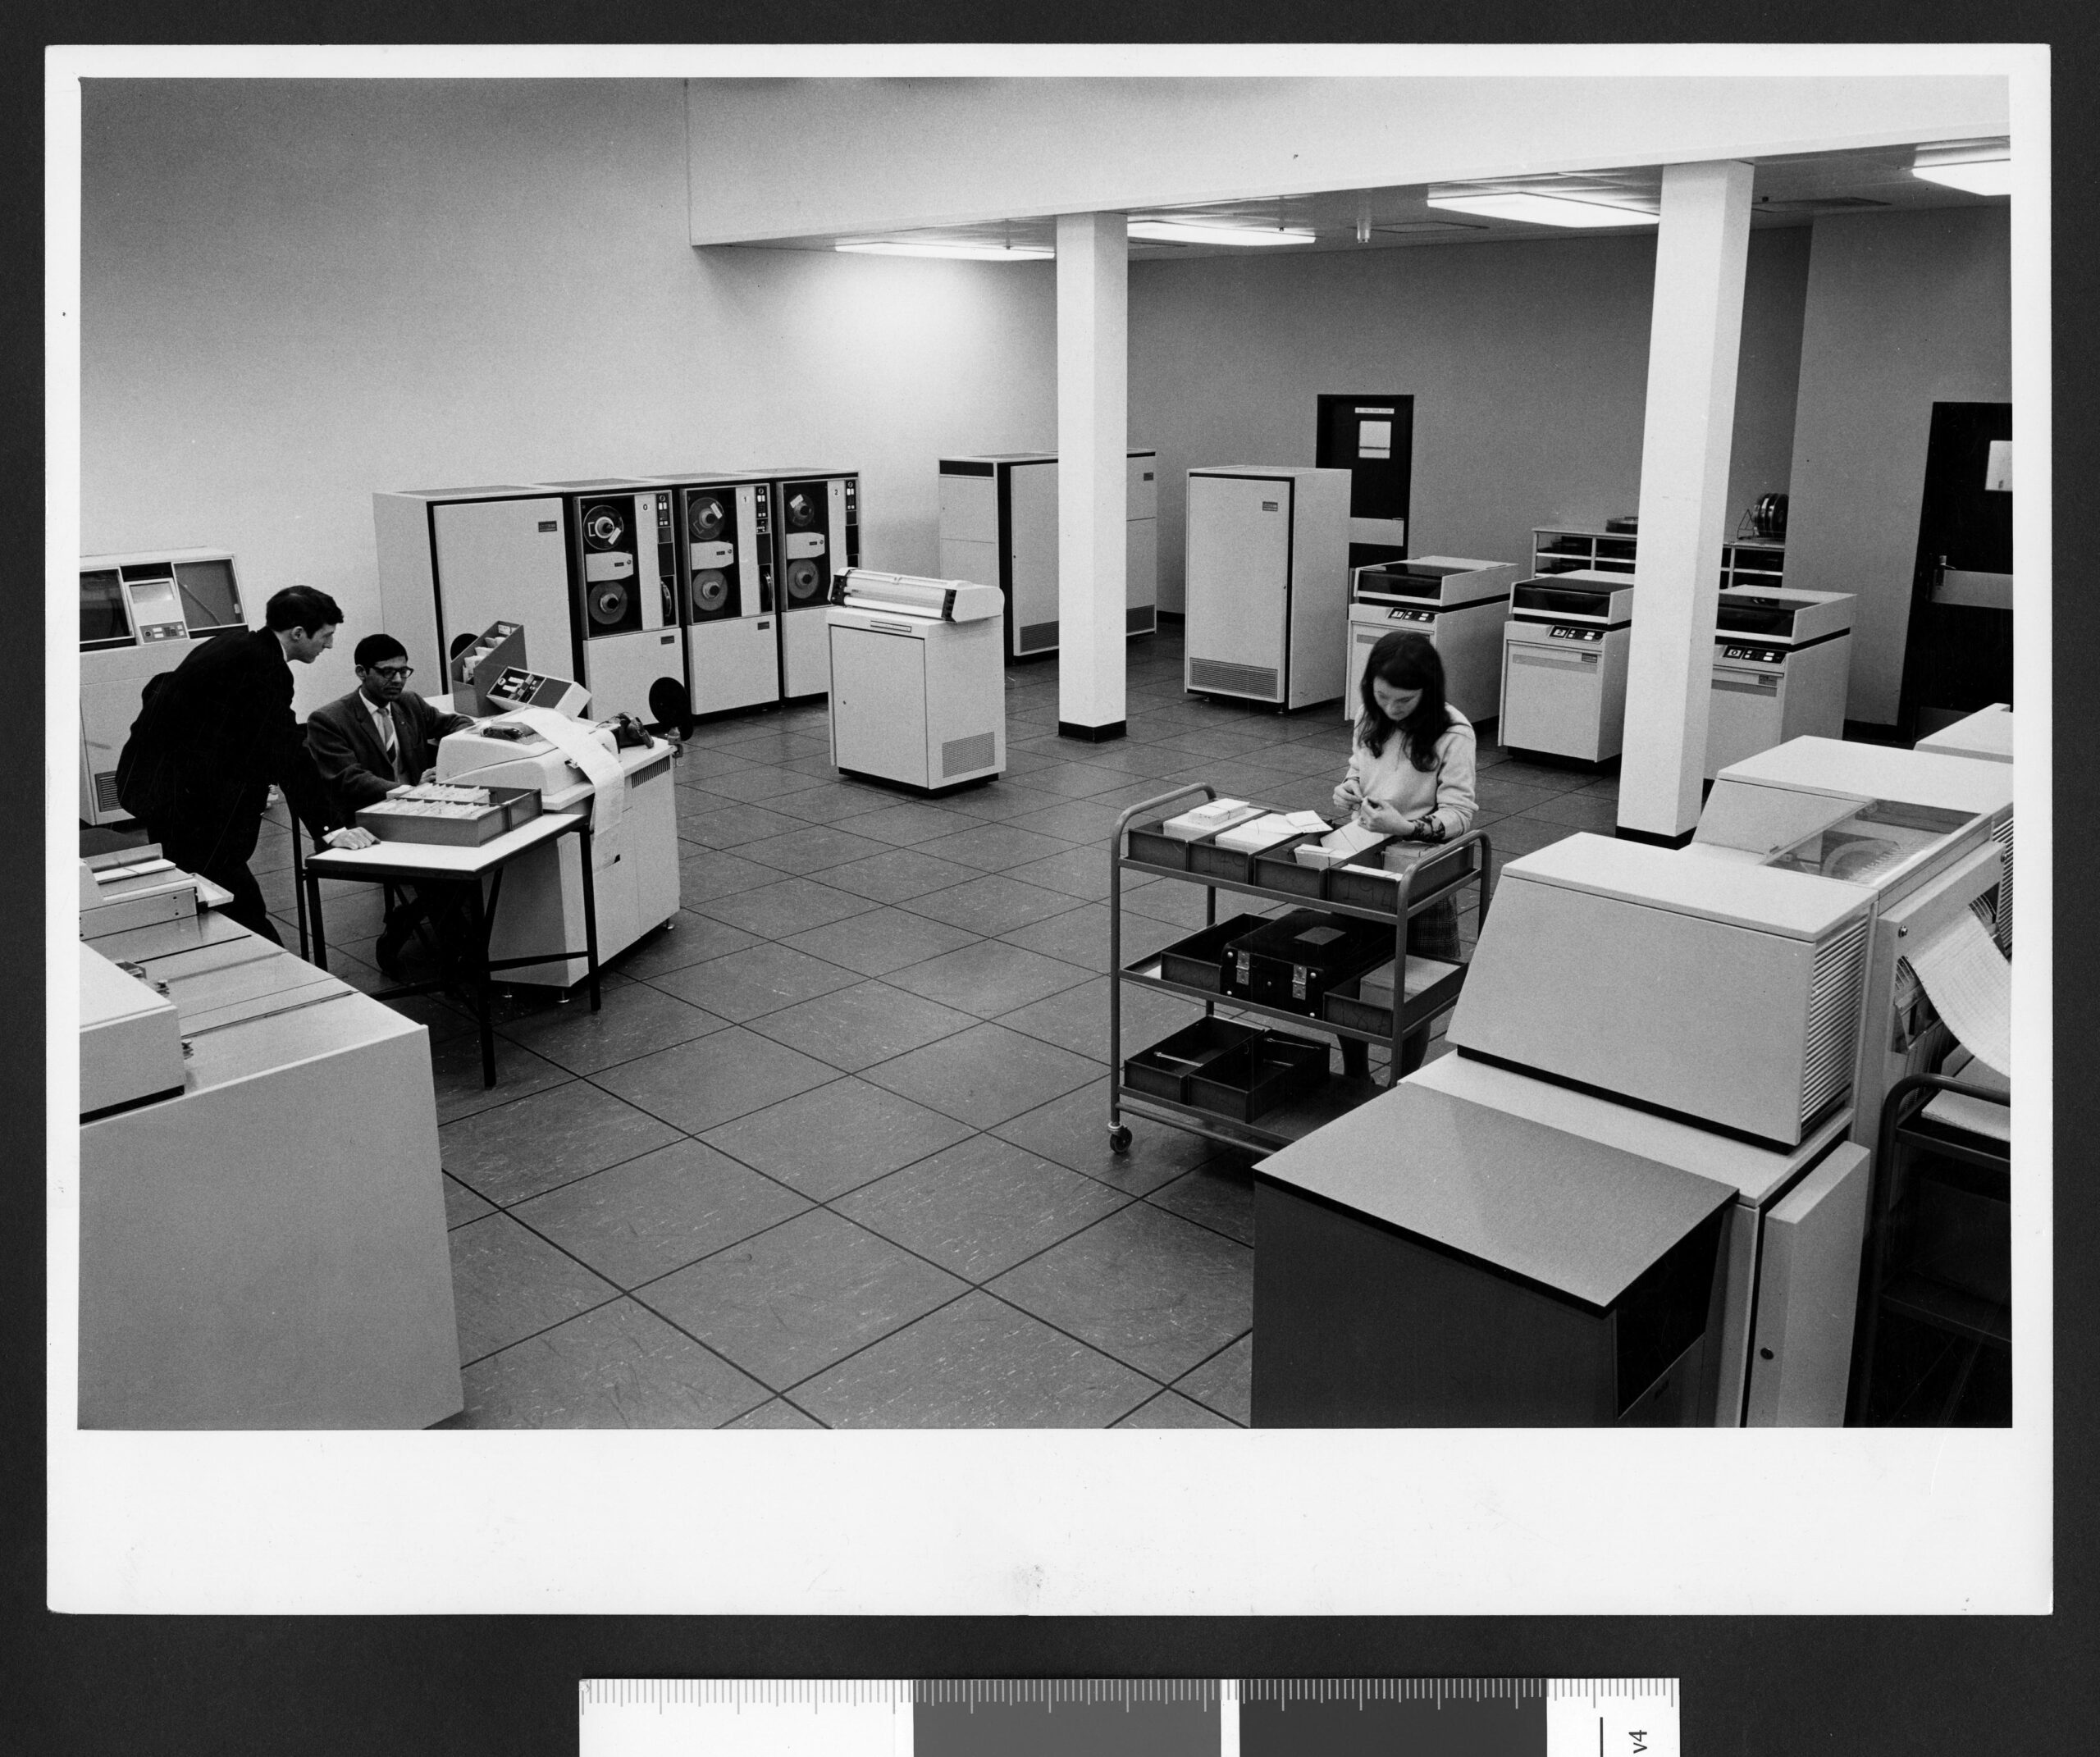 Using the ICL 4-50 computer, 1971-79